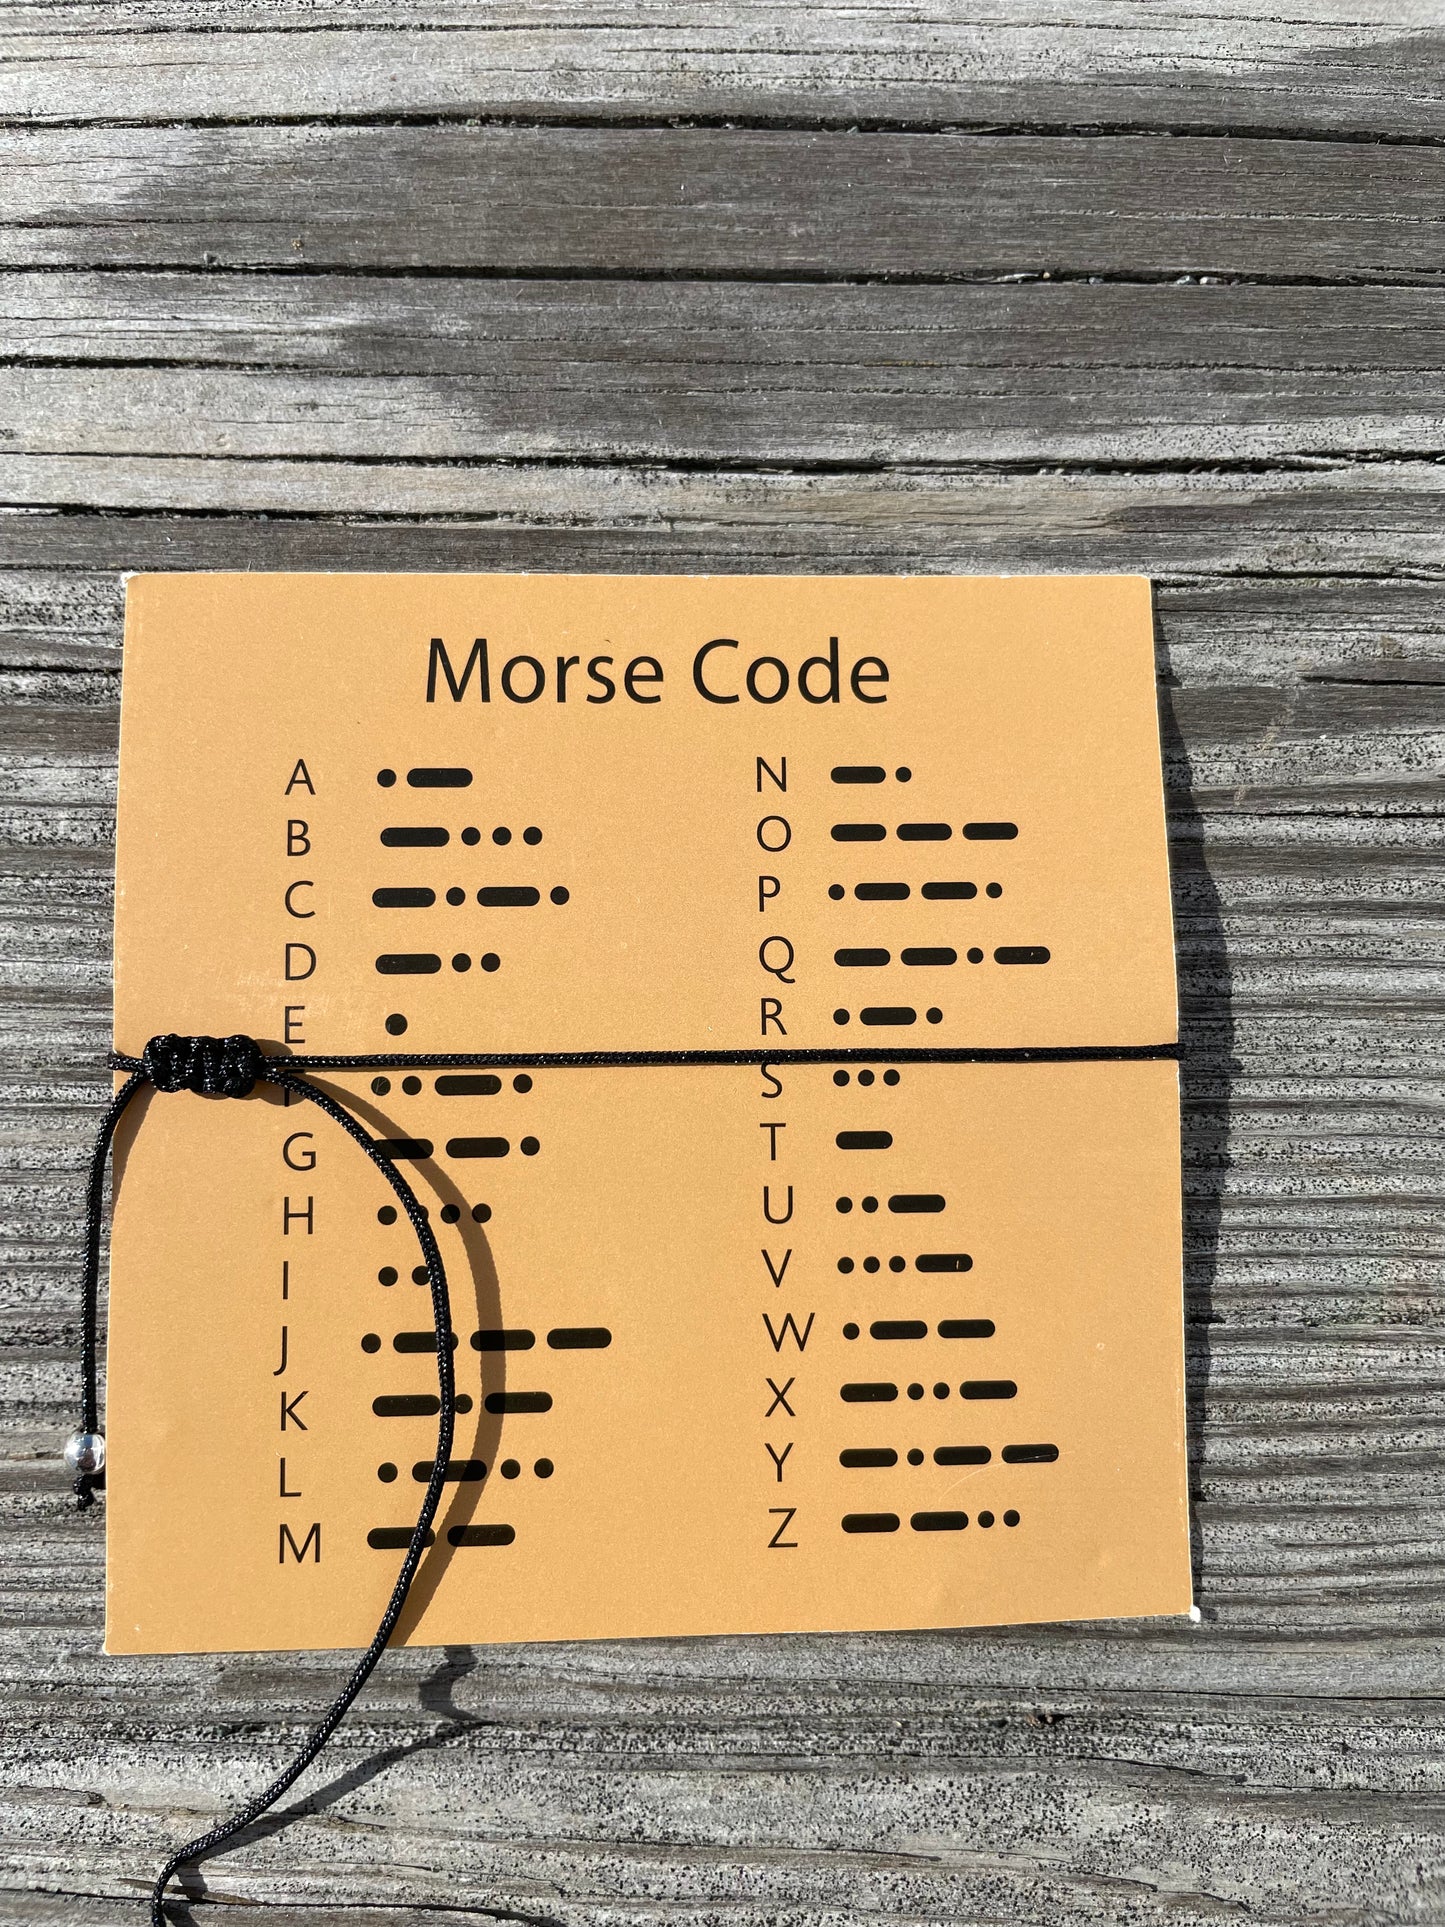 The back of the morse code card showing what each letter dot is of the alphabet